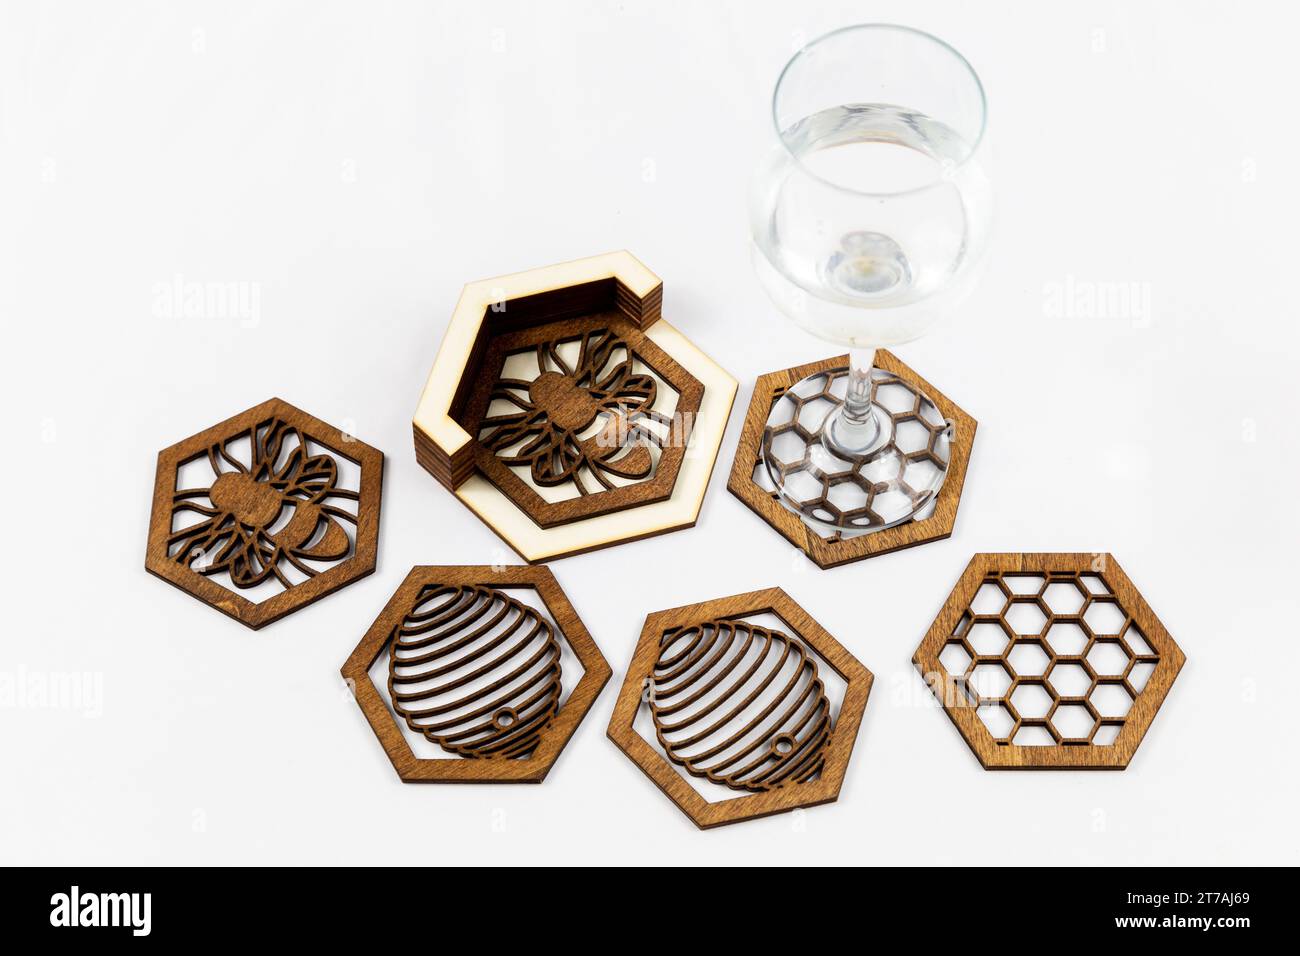 collection of wooden coasters with intricate designs and a wine glass on a white background. The coasters are hexagonal. Stock Photo